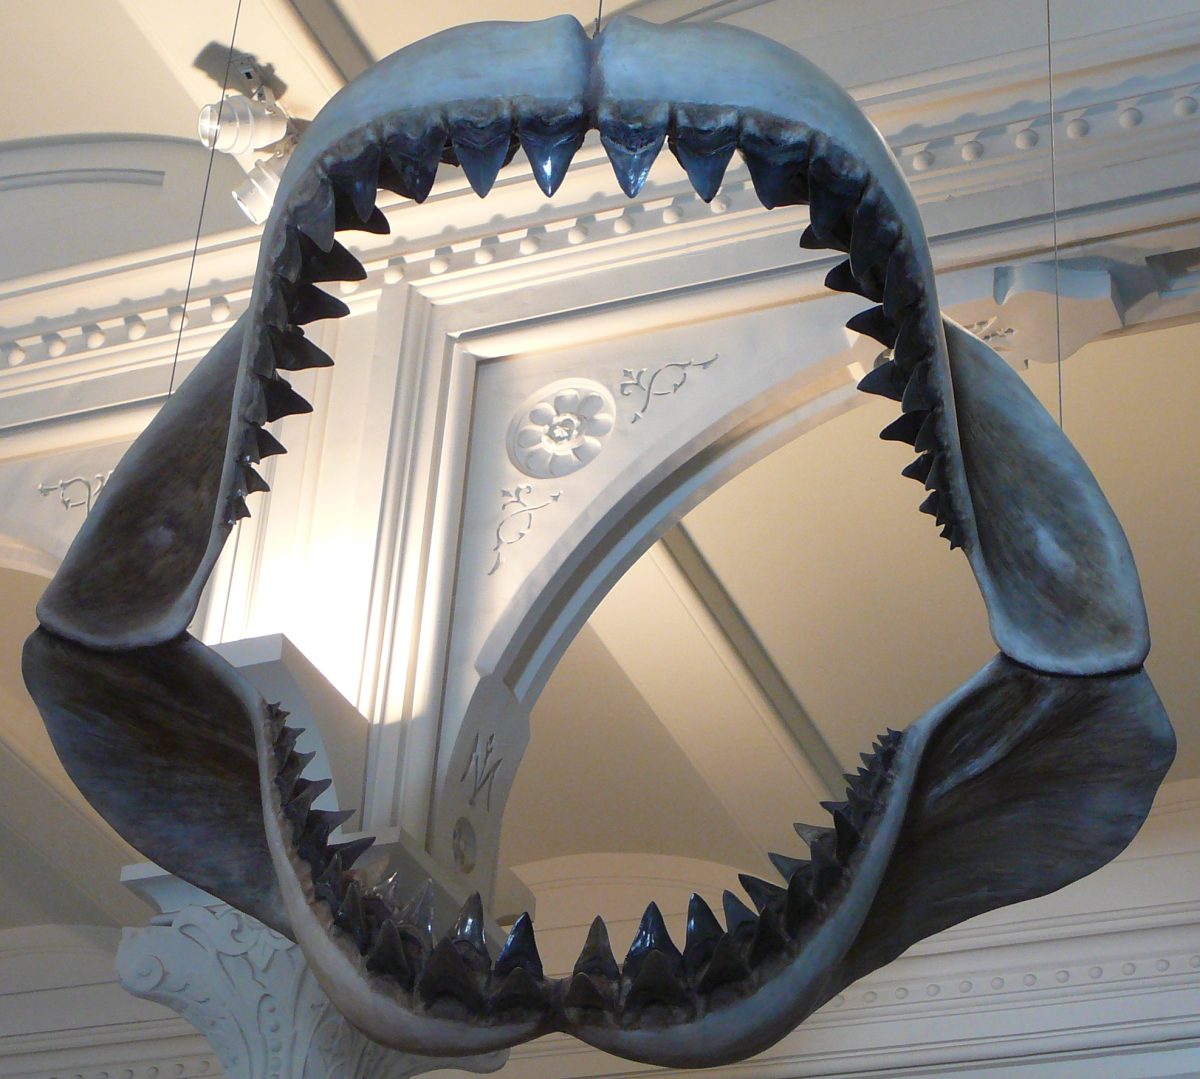 Megalodon+jaw+at+the+American+Museum+of+Natural+History.+Accessed+on+via+Wikipedia+commons+and+reposted+here+under+fair+use+rights.